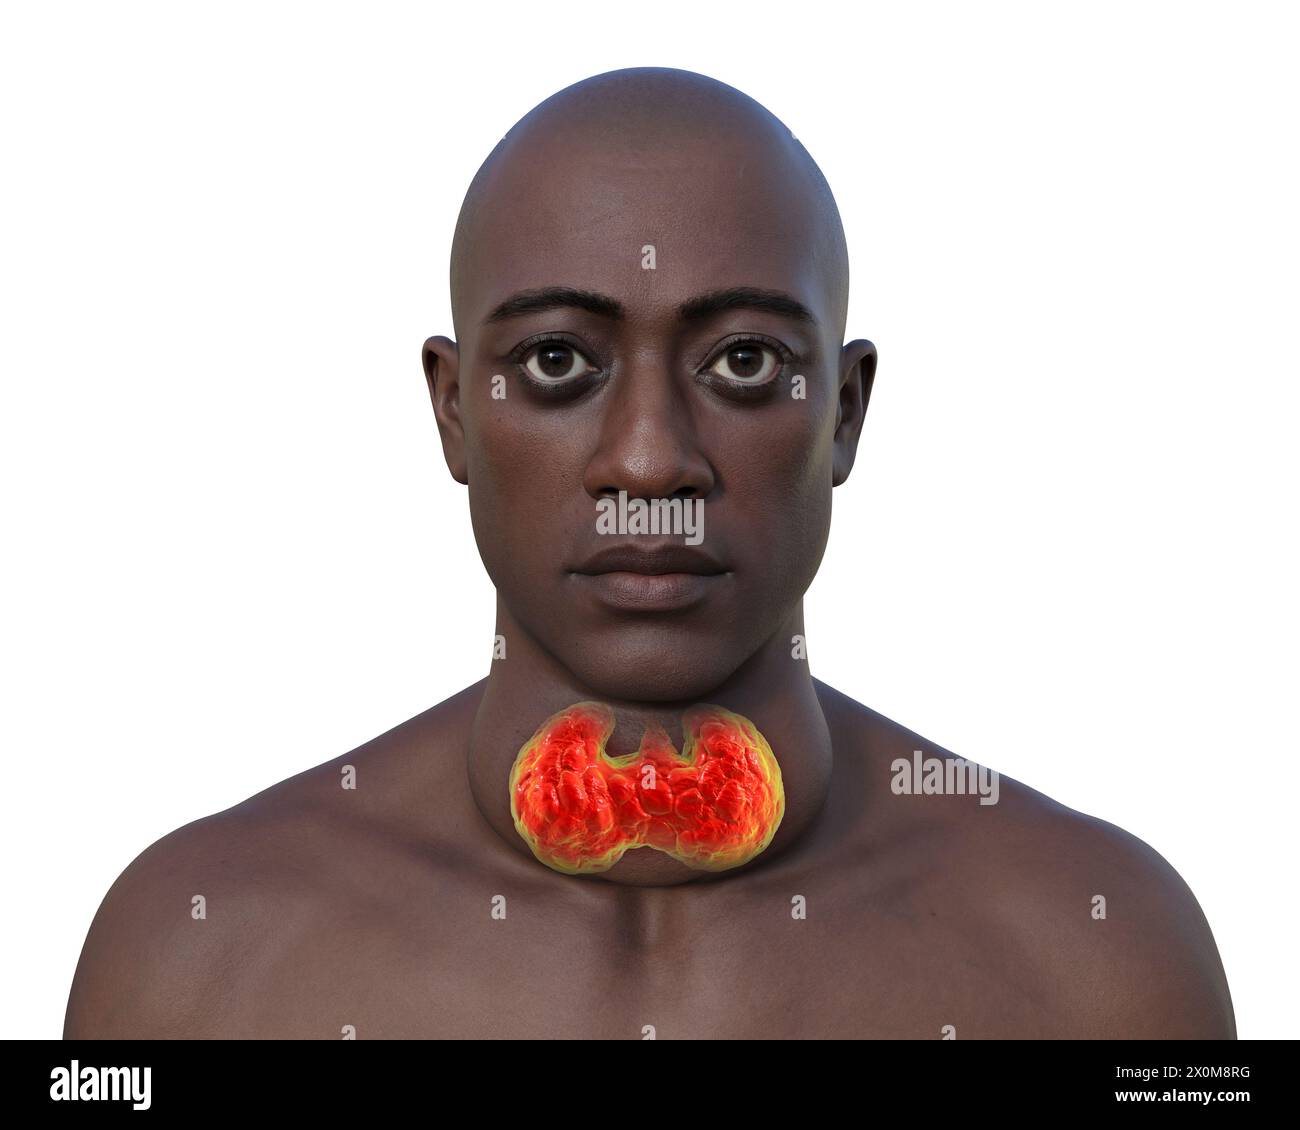 3D illustration of a man with an enlarged thyroid gland (goitre, base of neck) and abnormal protrusion of the eyes (exophthalmos). These are two sympt Stock Photo